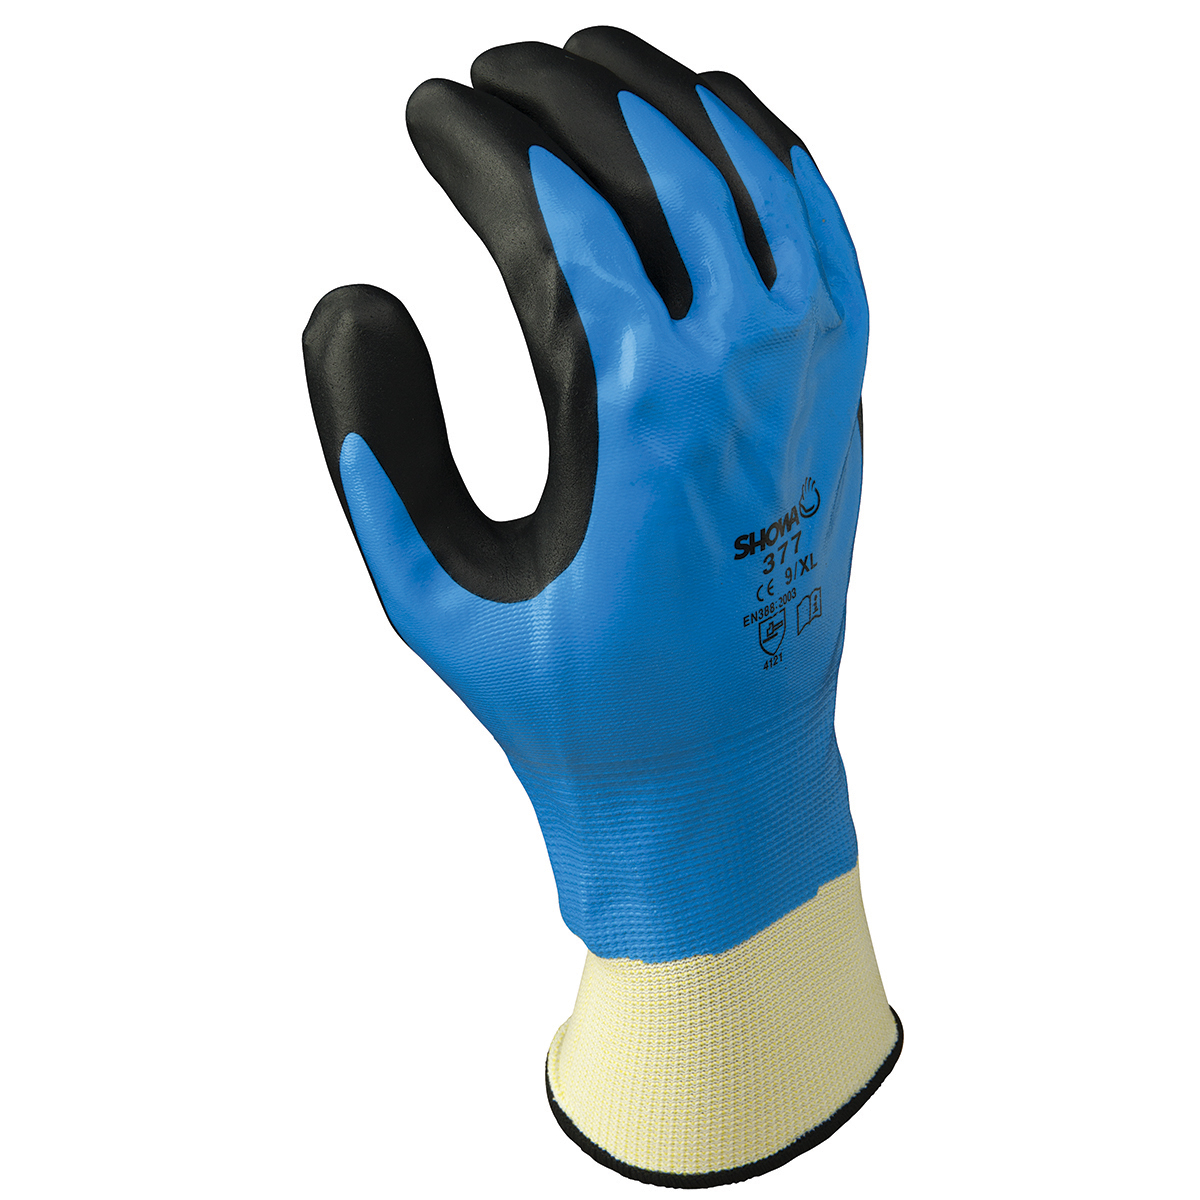 SHOWA® Size 10 13 Gauge Foam Nitrile Full Hand Coated Work Gloves With Seamless Knit Liner And Knit Wrist